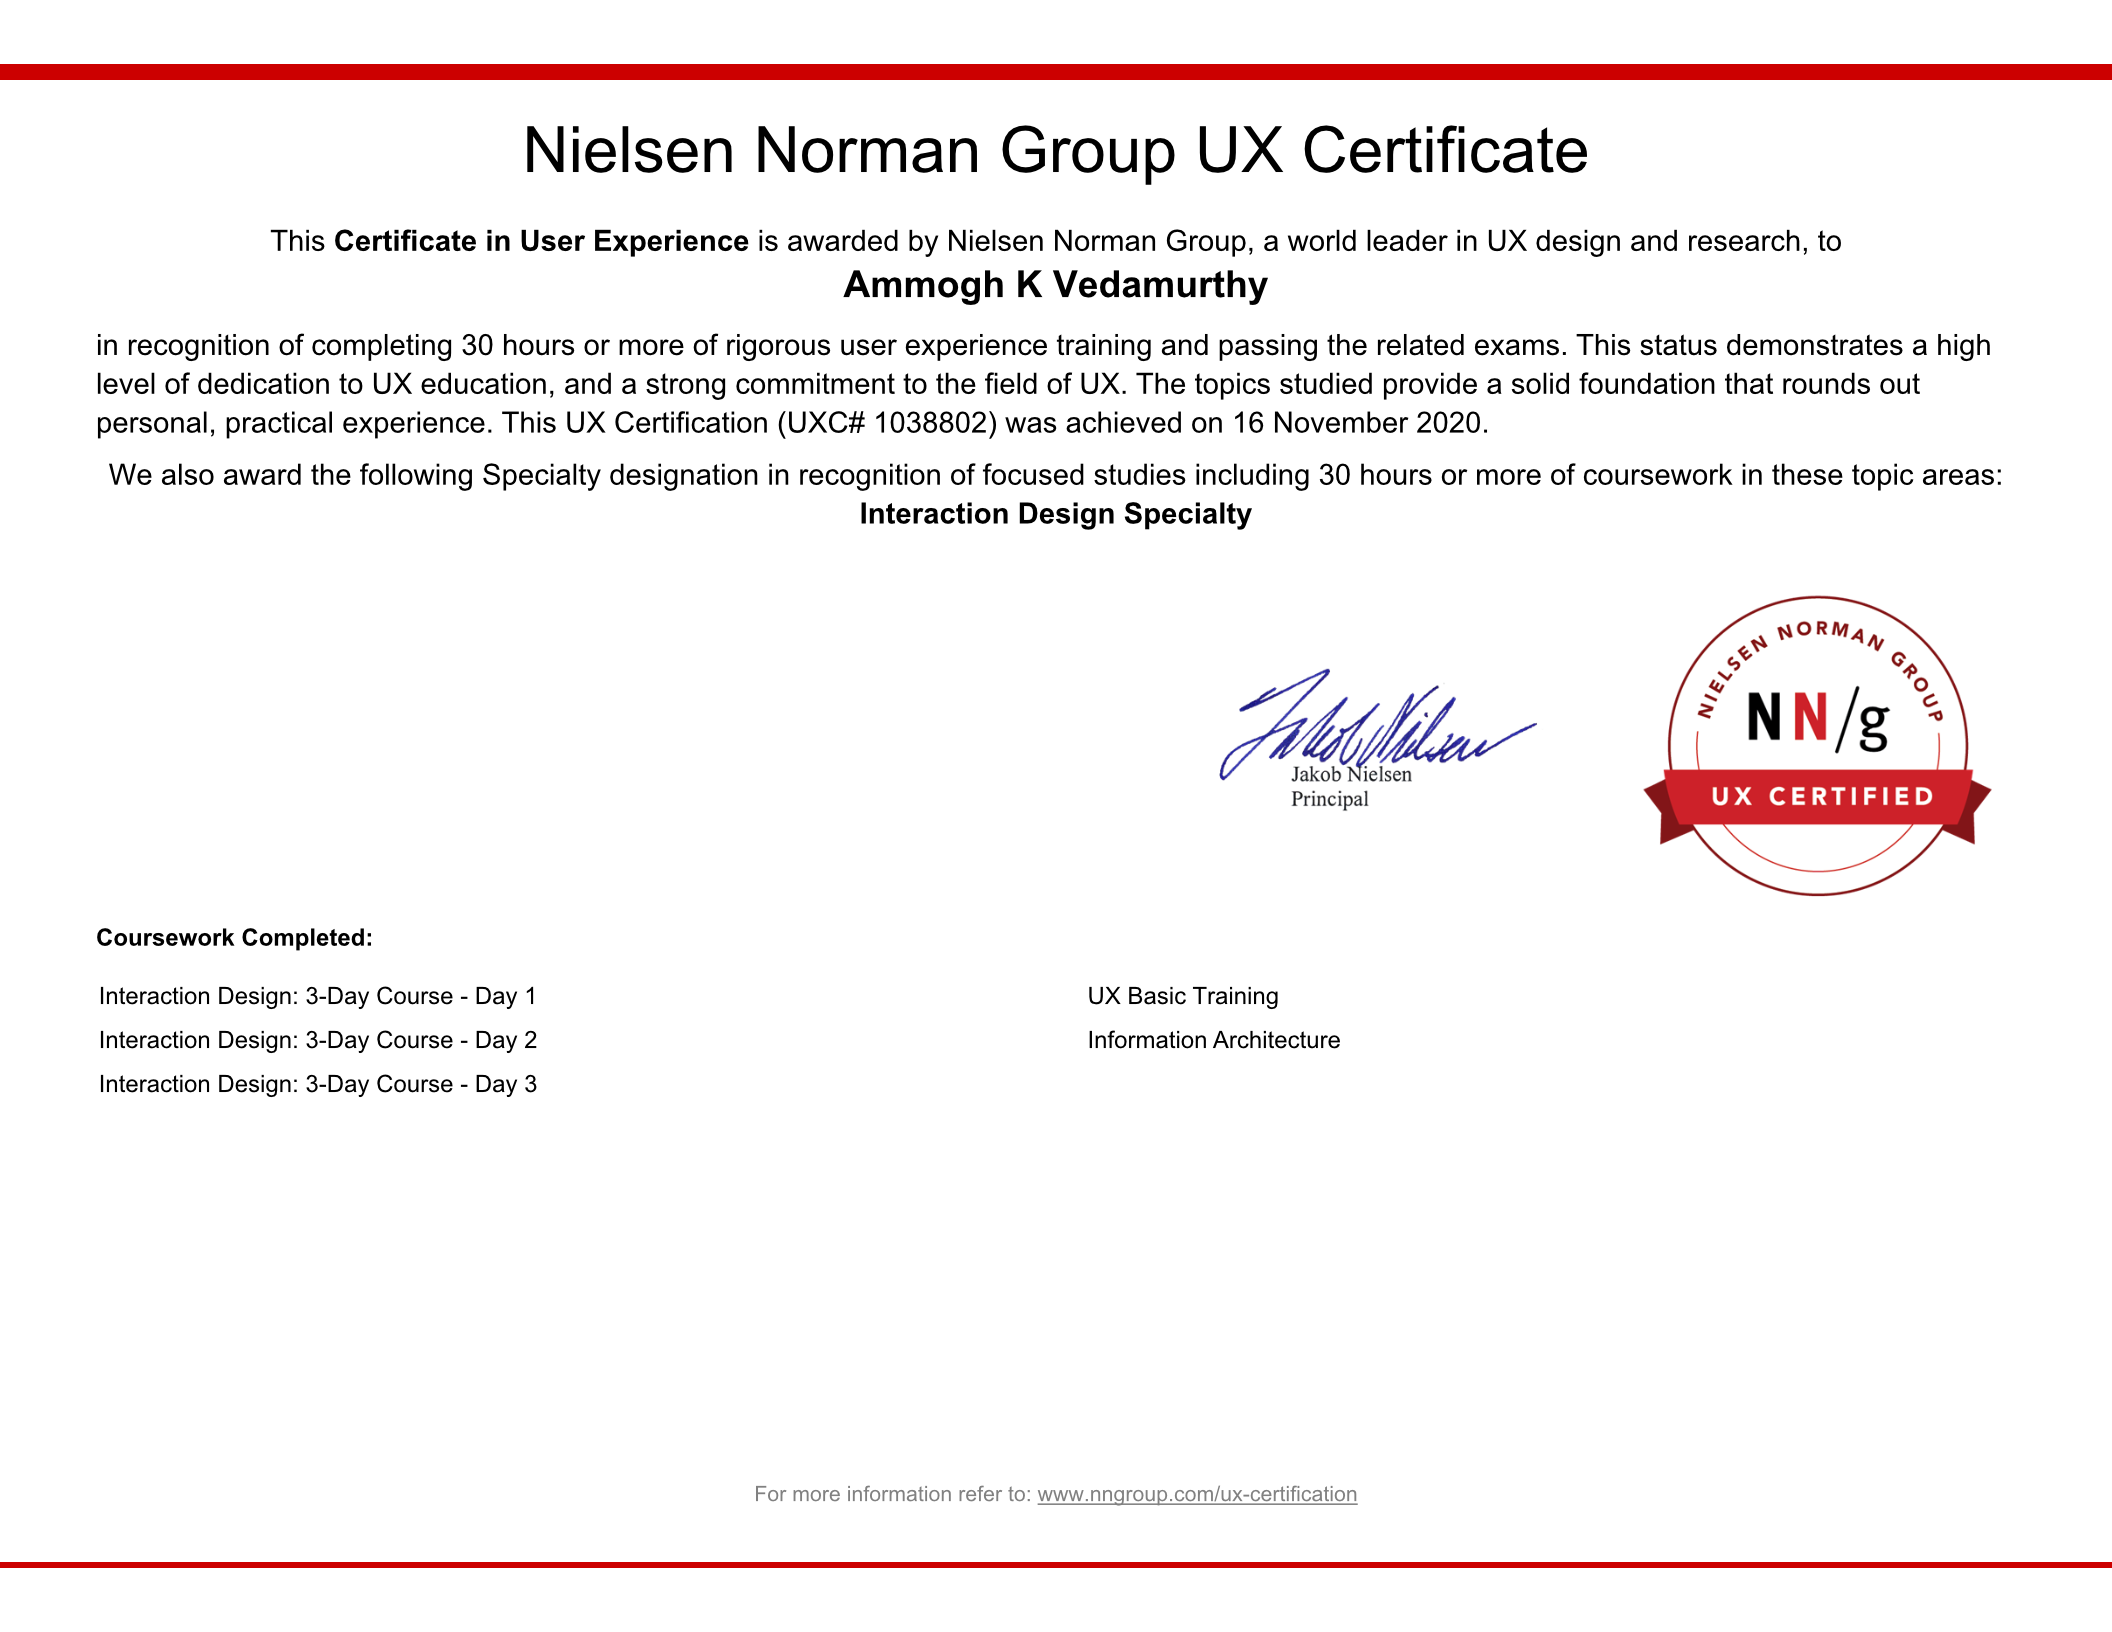 UX Certification Badge from Nielsen Norman Group